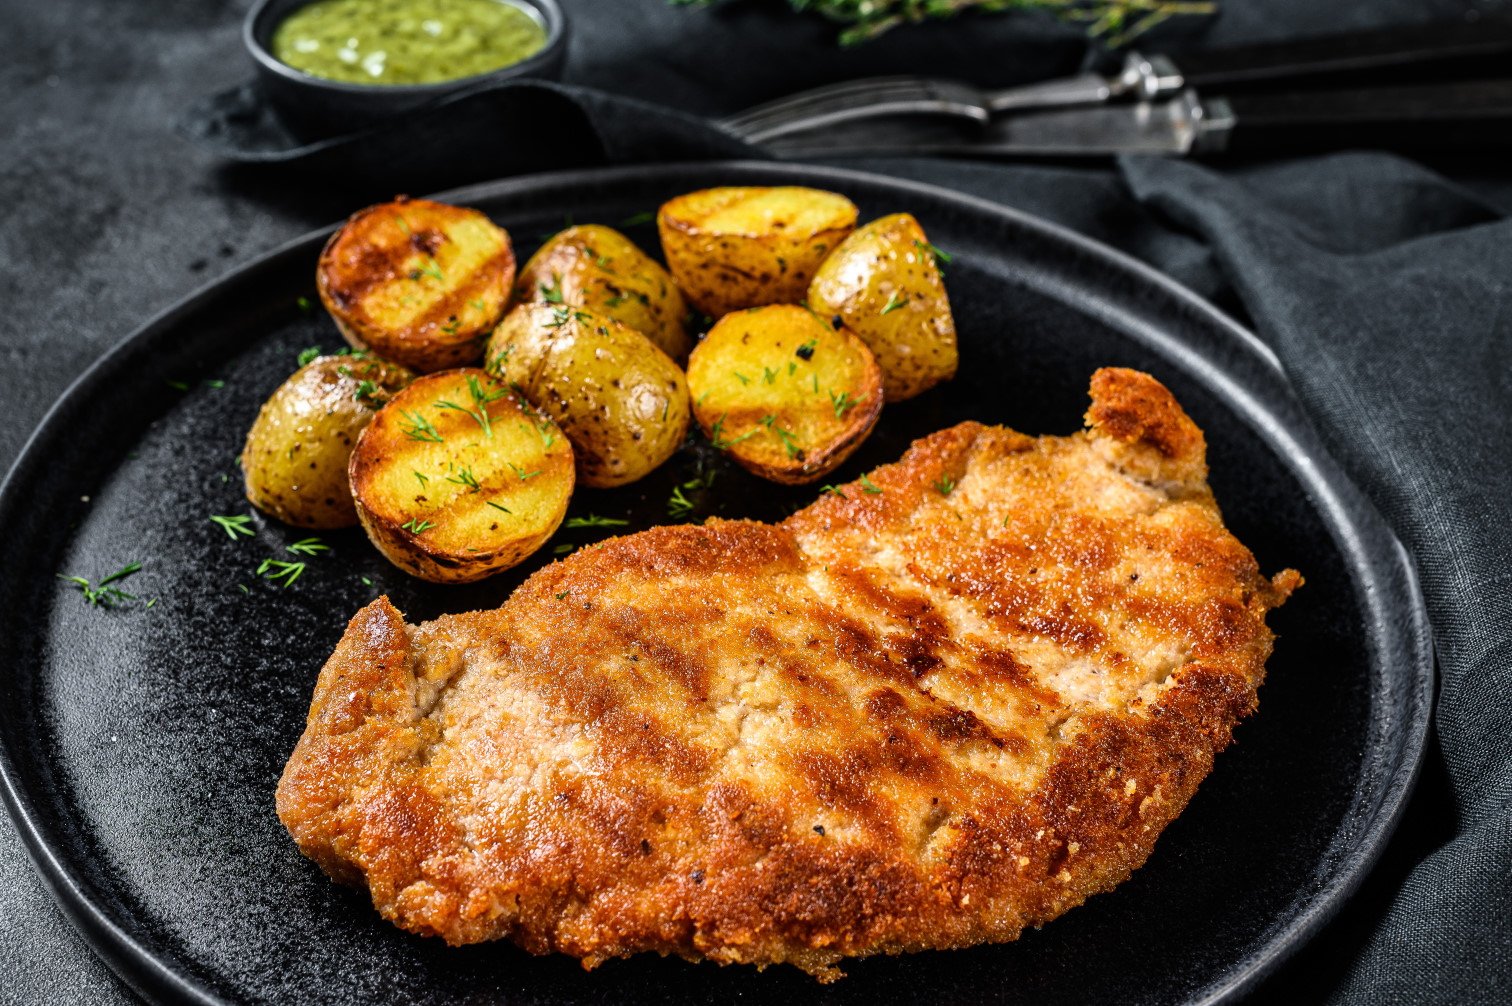 fried-chicken-schnitzel-with-baked-potatoes-black-surface-top-view